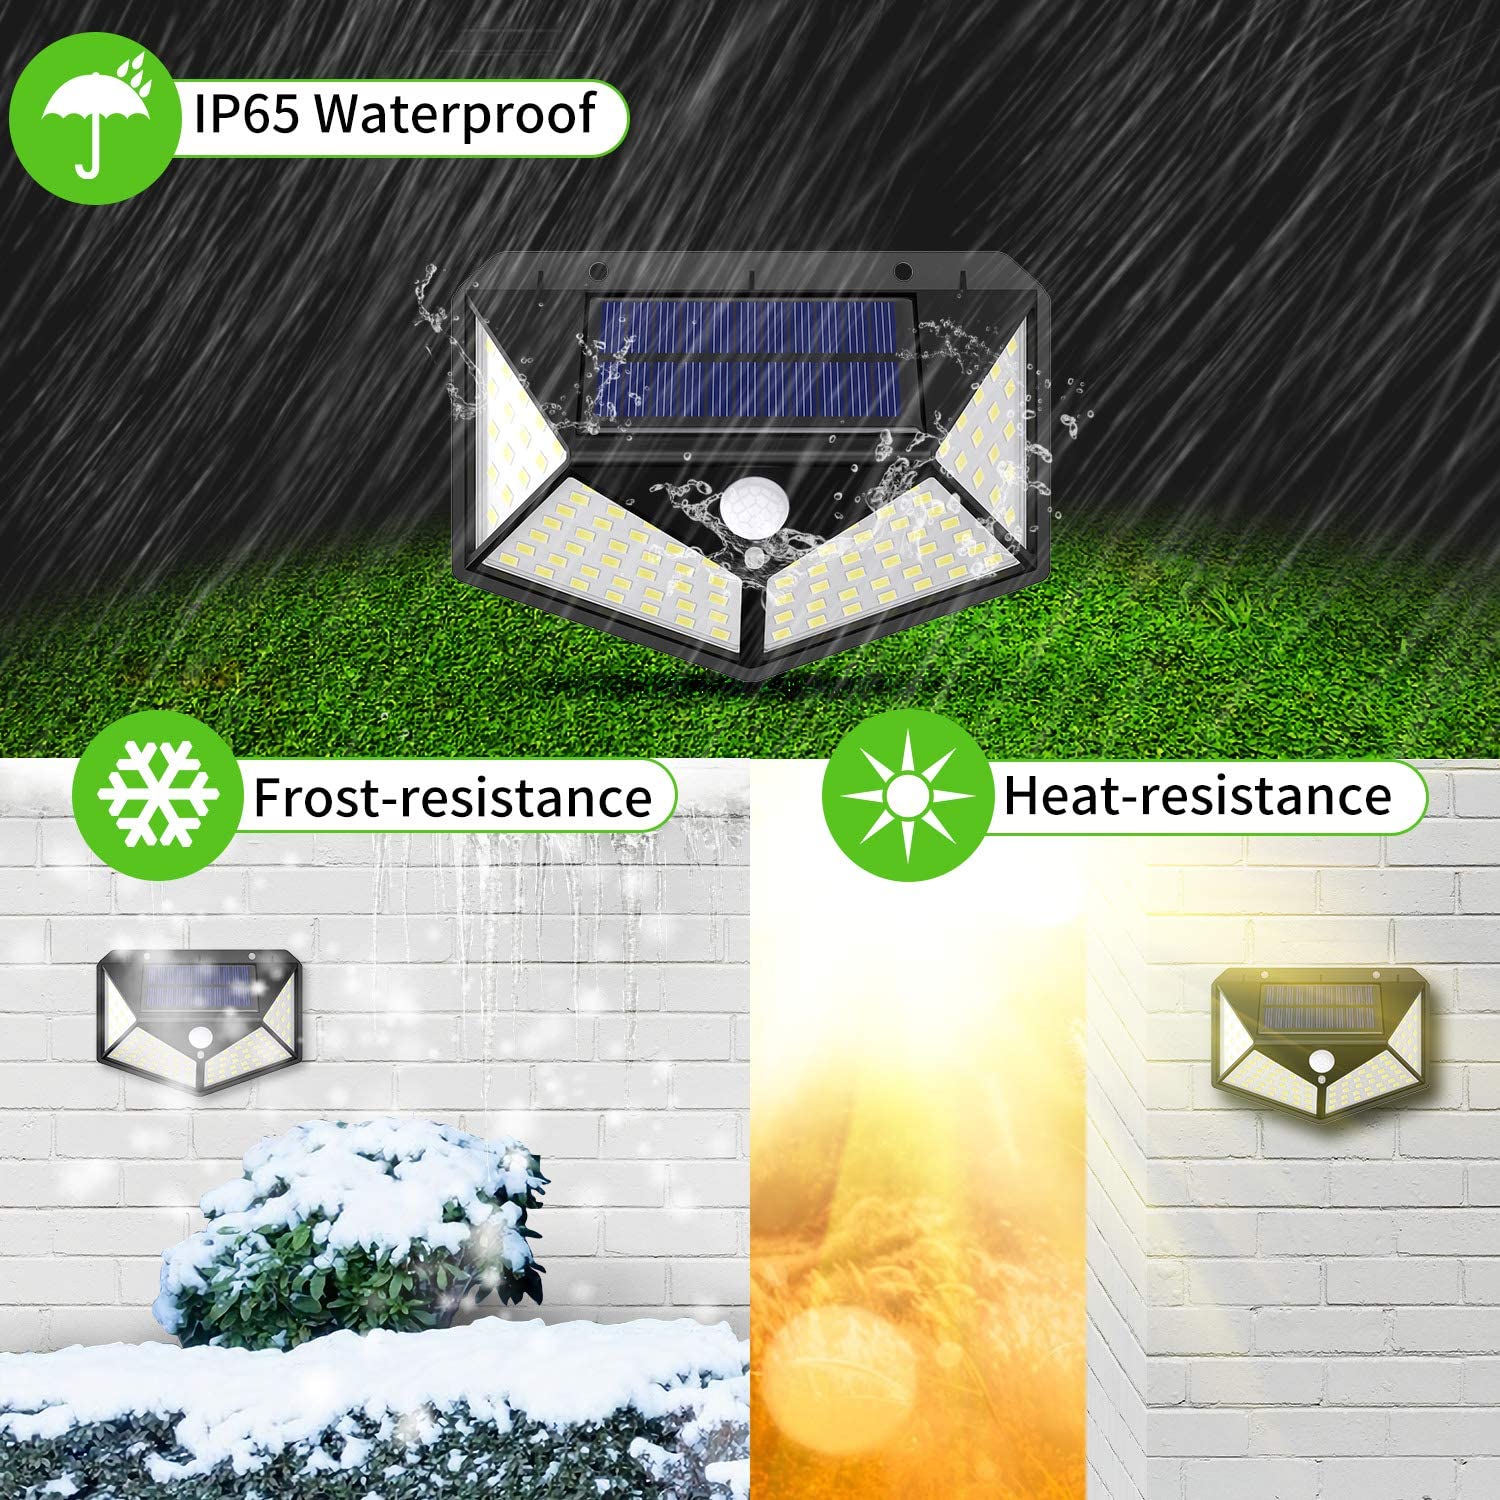 Solar Lights Outdoor, Solar Powered Motion Sensor Lights 100 LEDs Outdoor Waterproof Wall Light Night Light with 3 Modes with 270° Wide Angle for Garden, Patio Yard, Deck Garage, Fence - 1 Pack - image 4 of 8